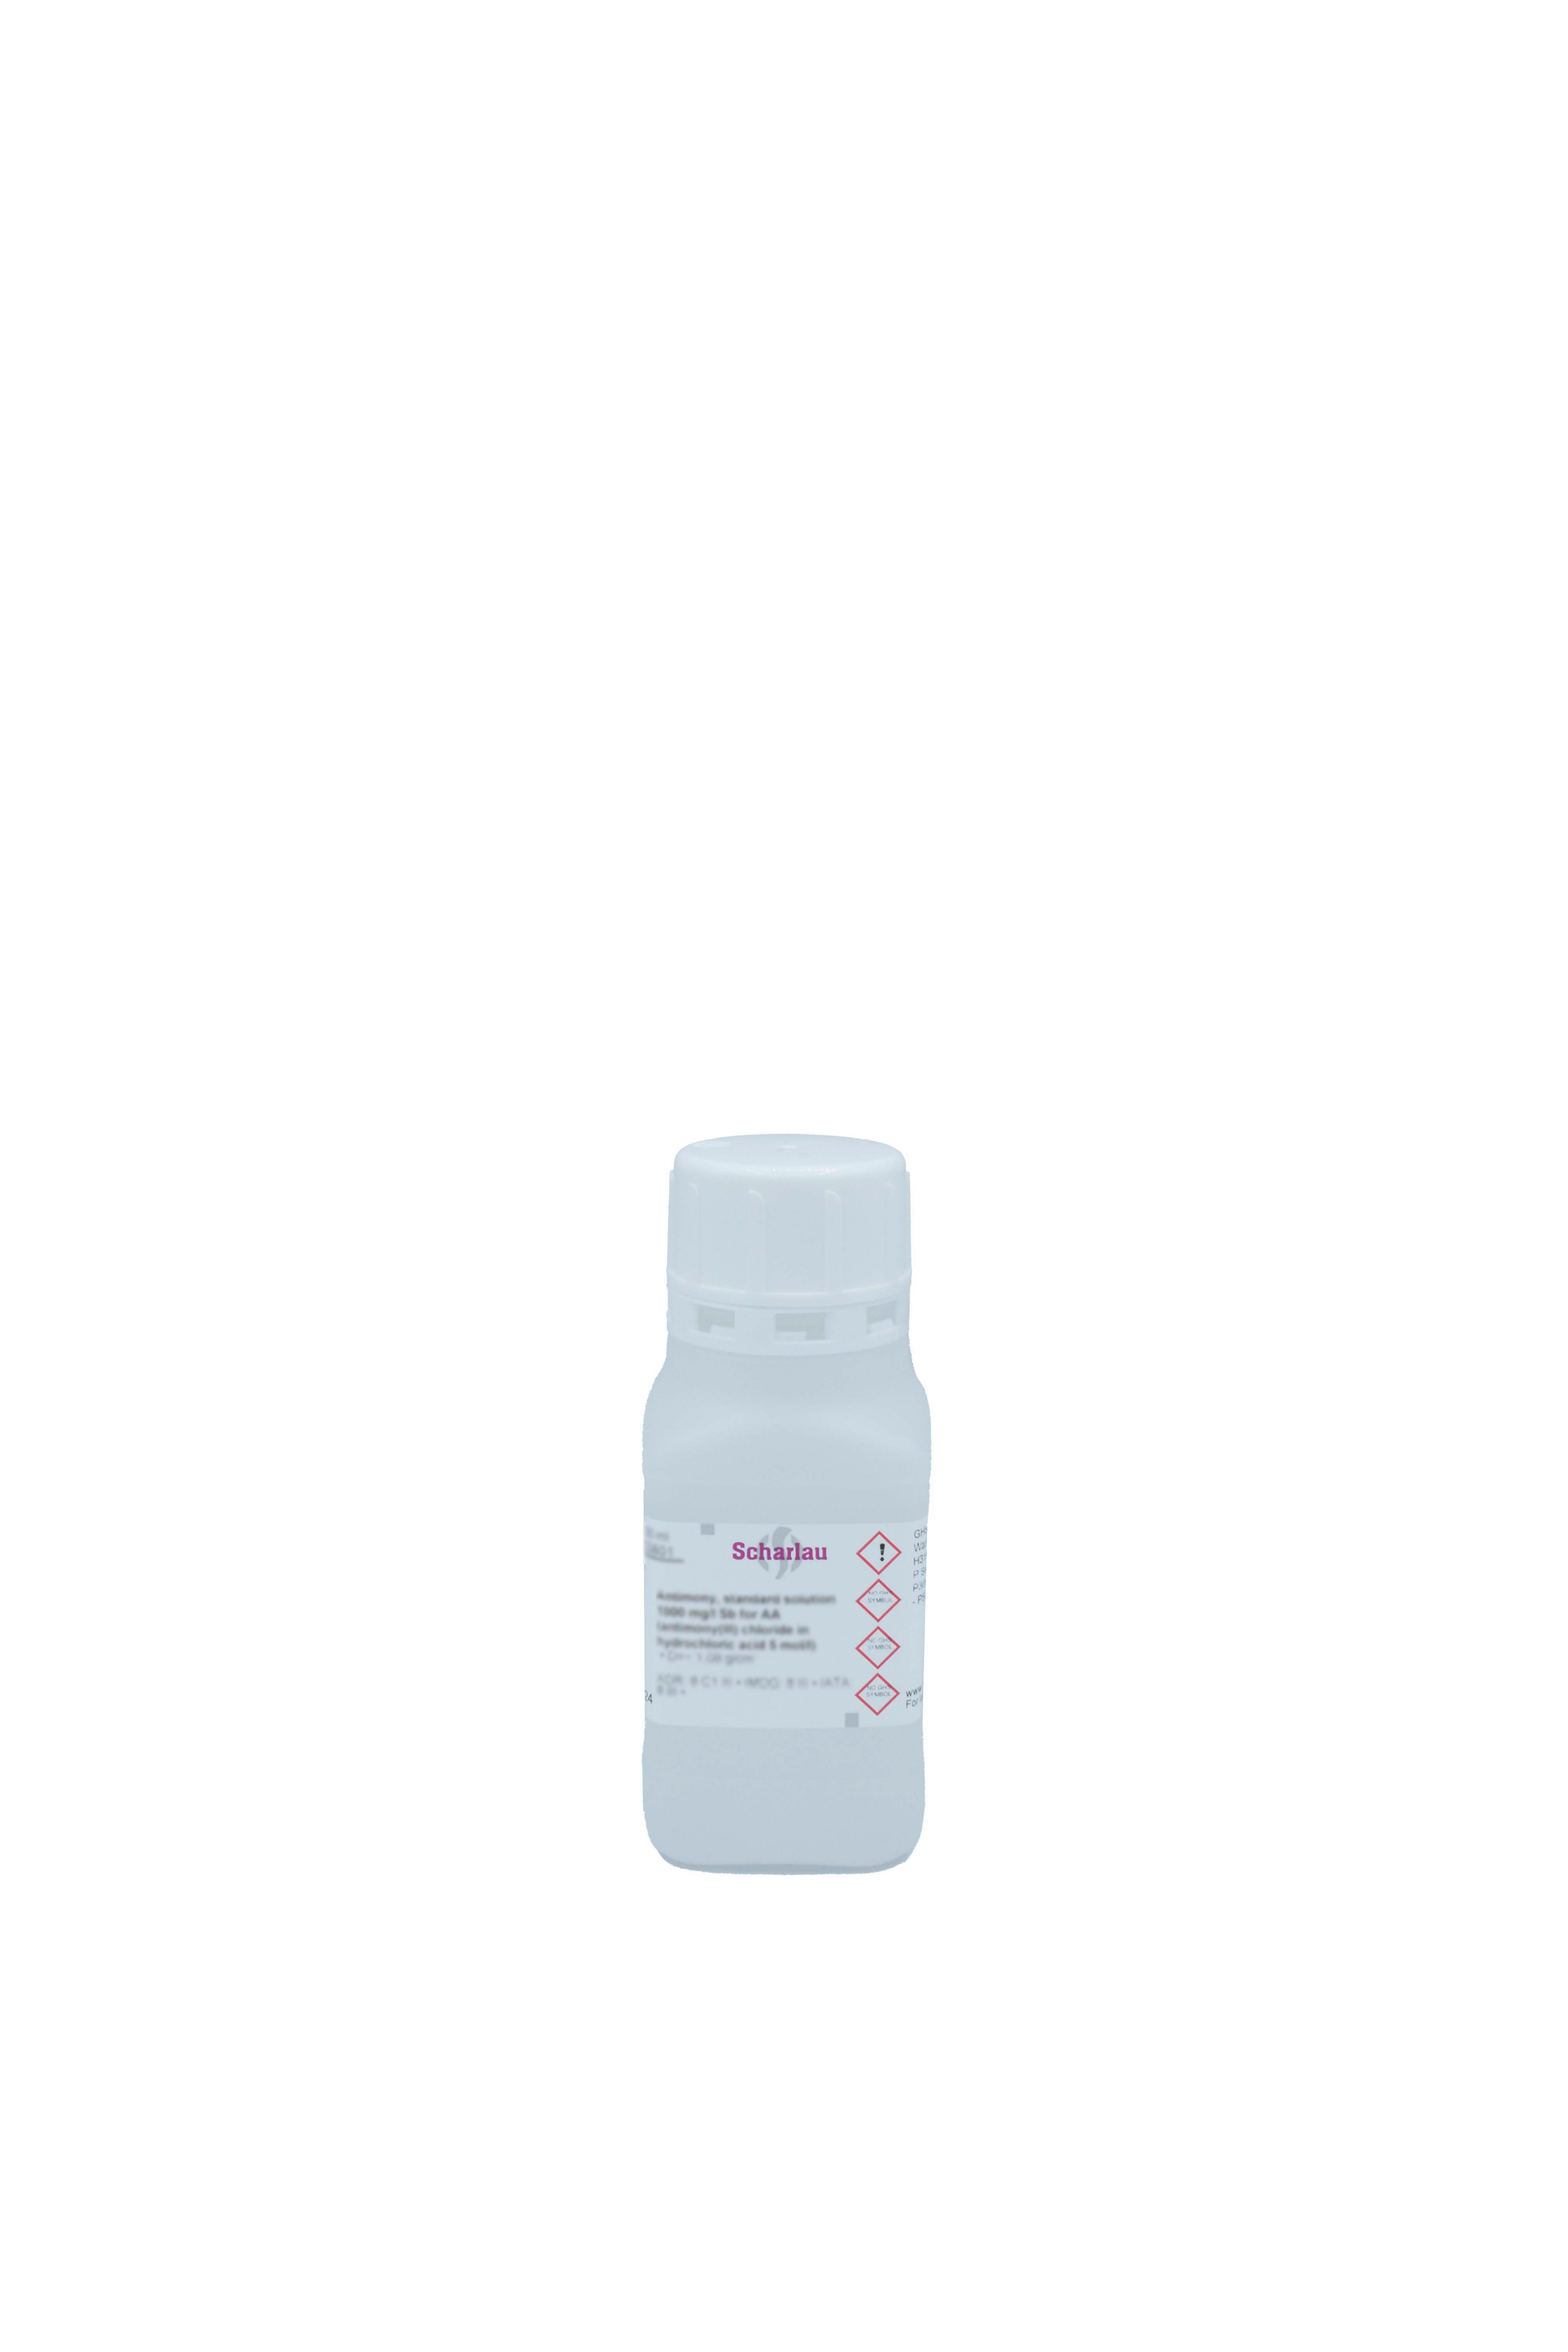 Manganese, standard solution 1000 mg/l Mn for AAsS (manganese nitrate in HNO3 0,5 mol/l)